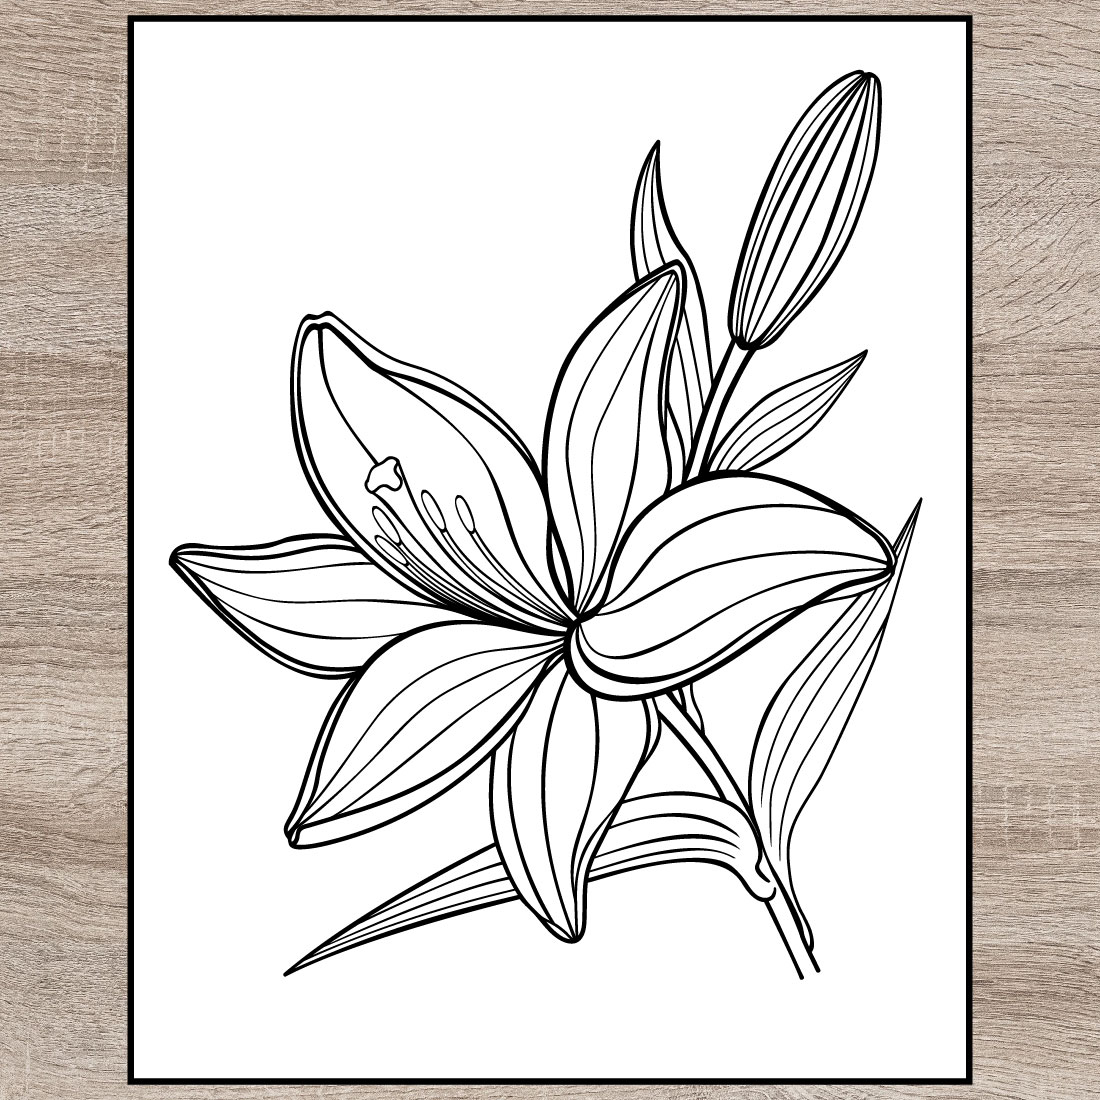 Learn How to Draw the Lily Flower, Petals, and Leaves